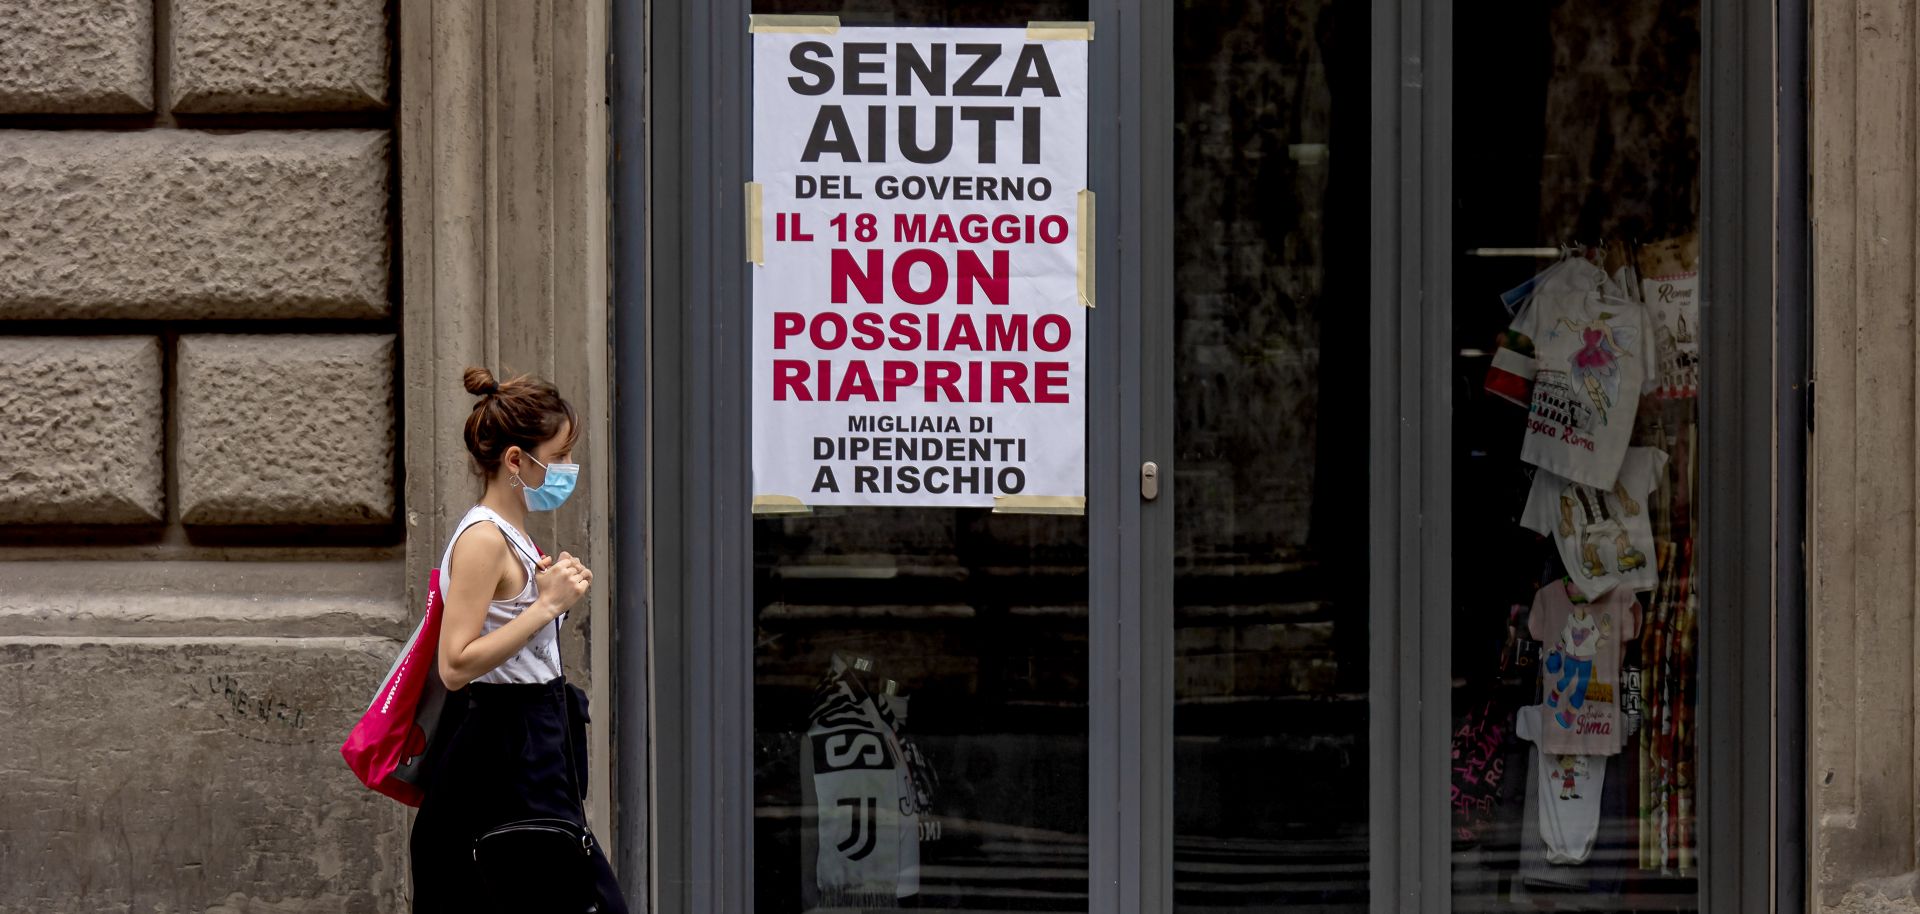 A woman wearing a face mask walks past a closed shop in Rome, Italy, on May 18, 2020. The sign on the store window reads "Without government aid, we cannot reopen on May 18. Thousands of employees at risk." 